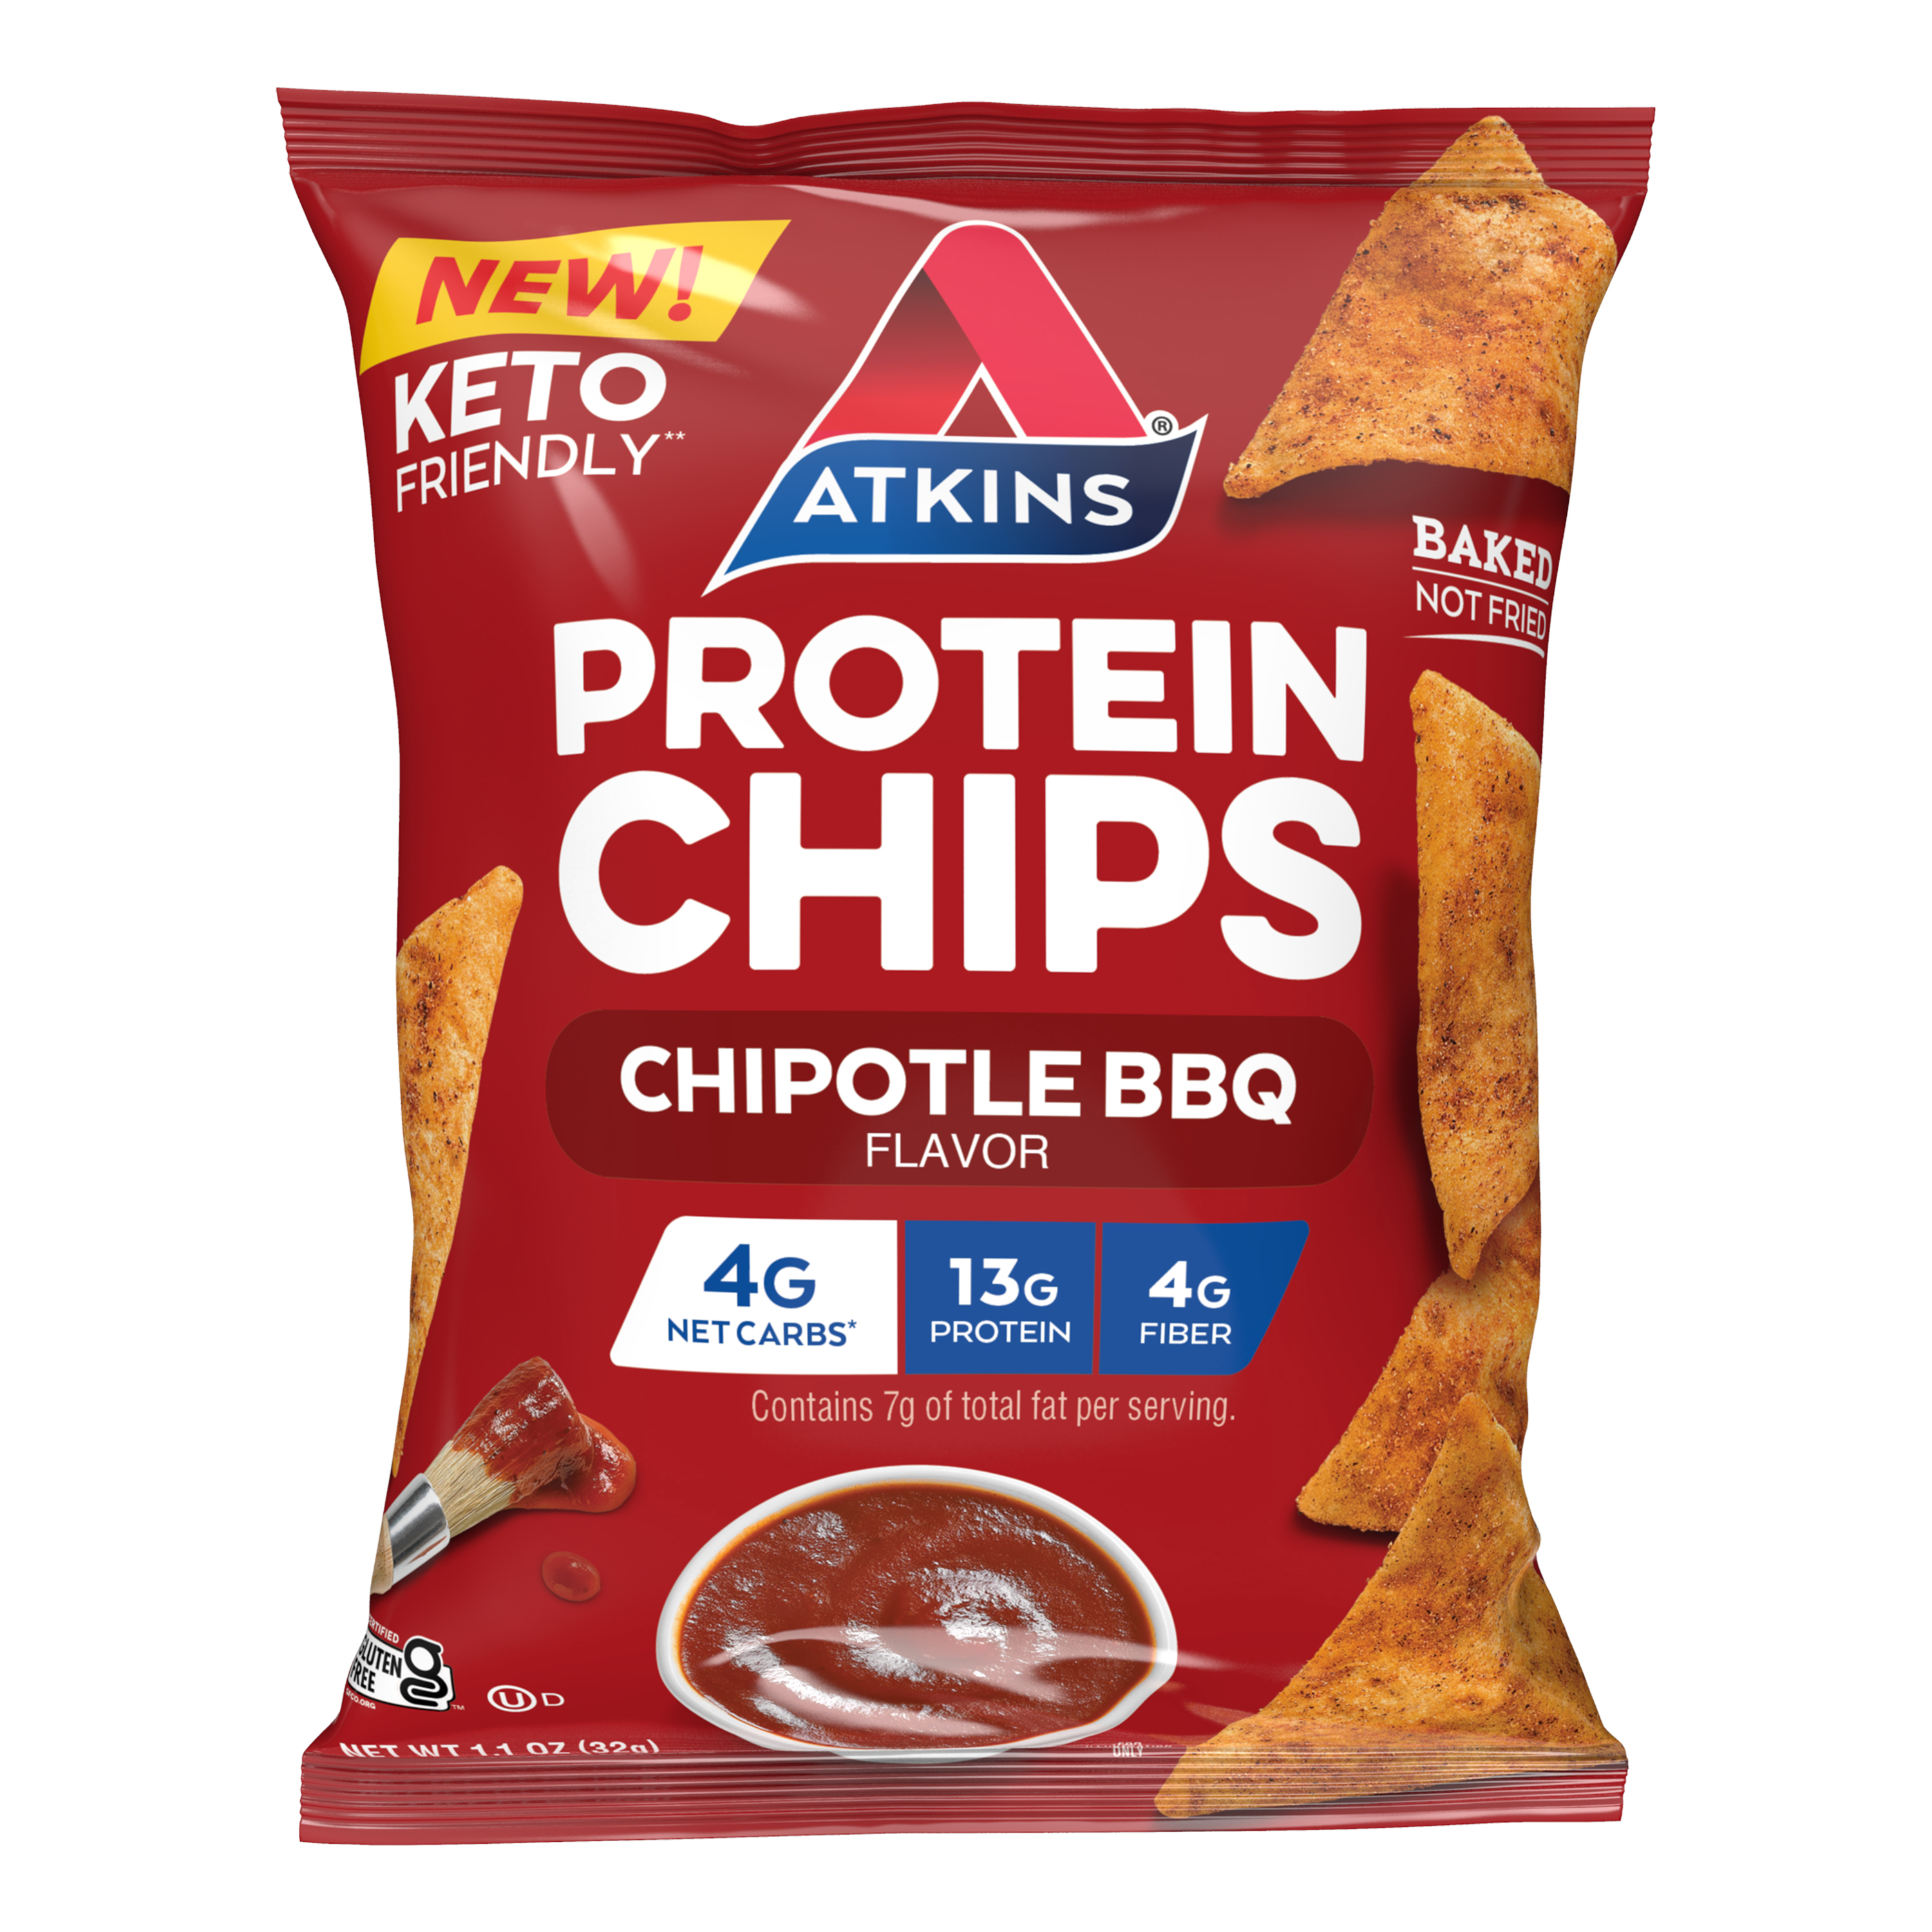 Chipotle BBQ Protein Chips